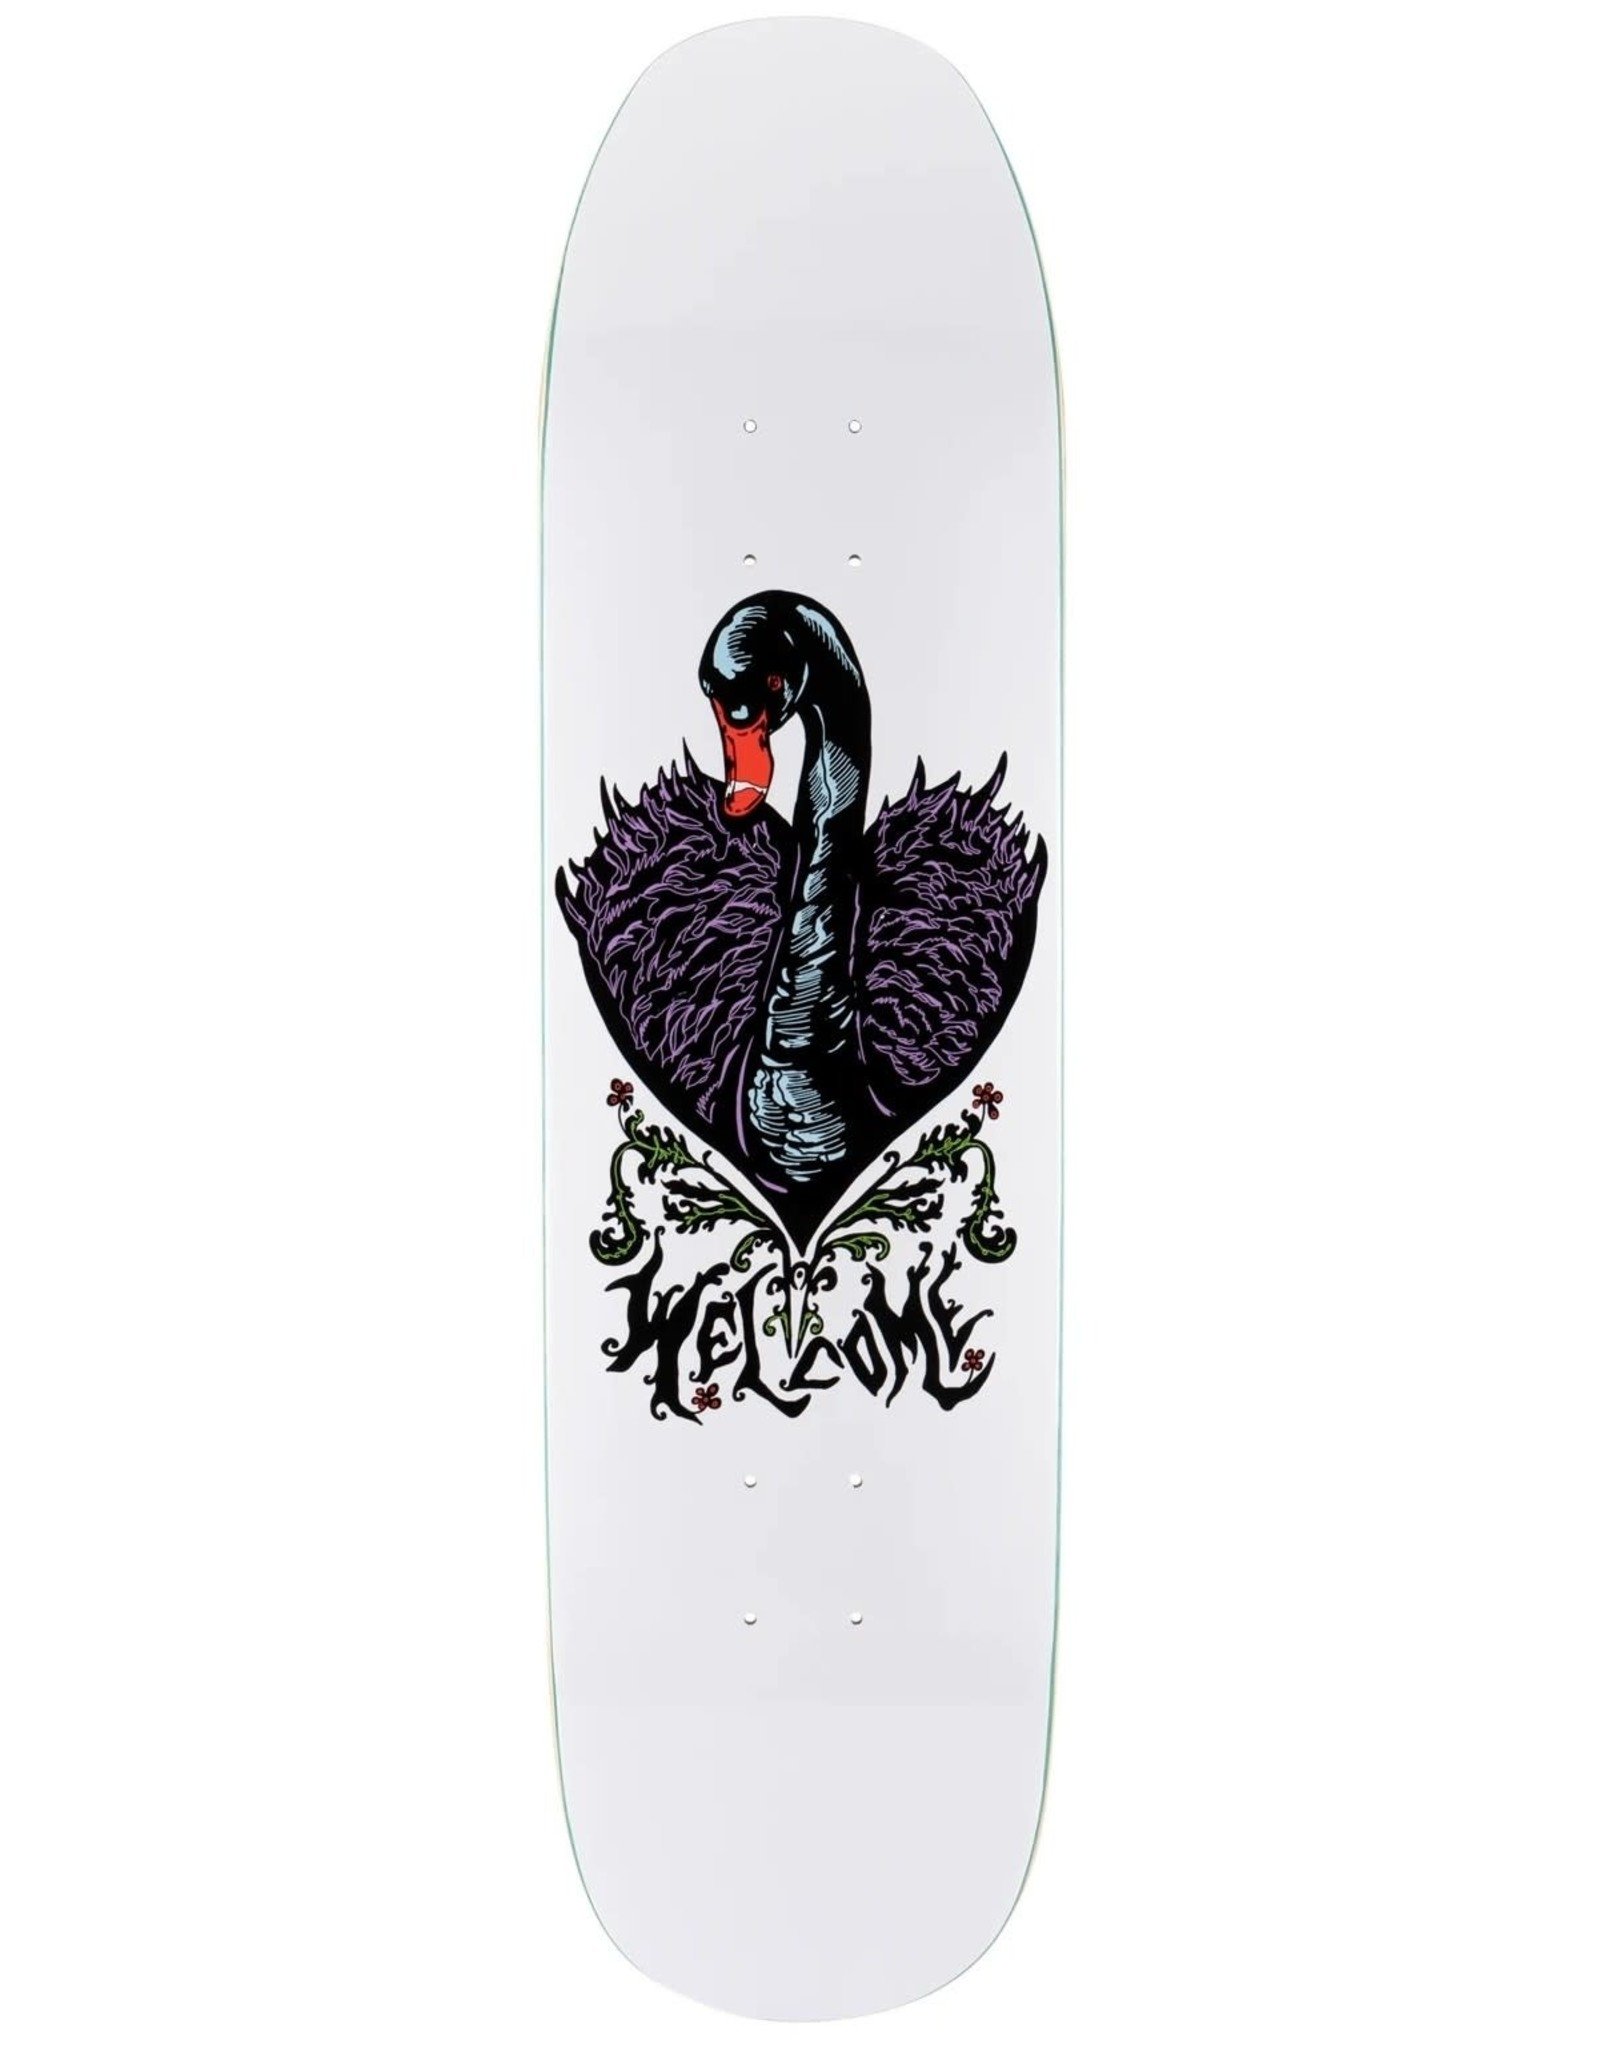 Welcome Welcome - BLACK SWAN - Son of Moontrimmer DECK - 8.25"